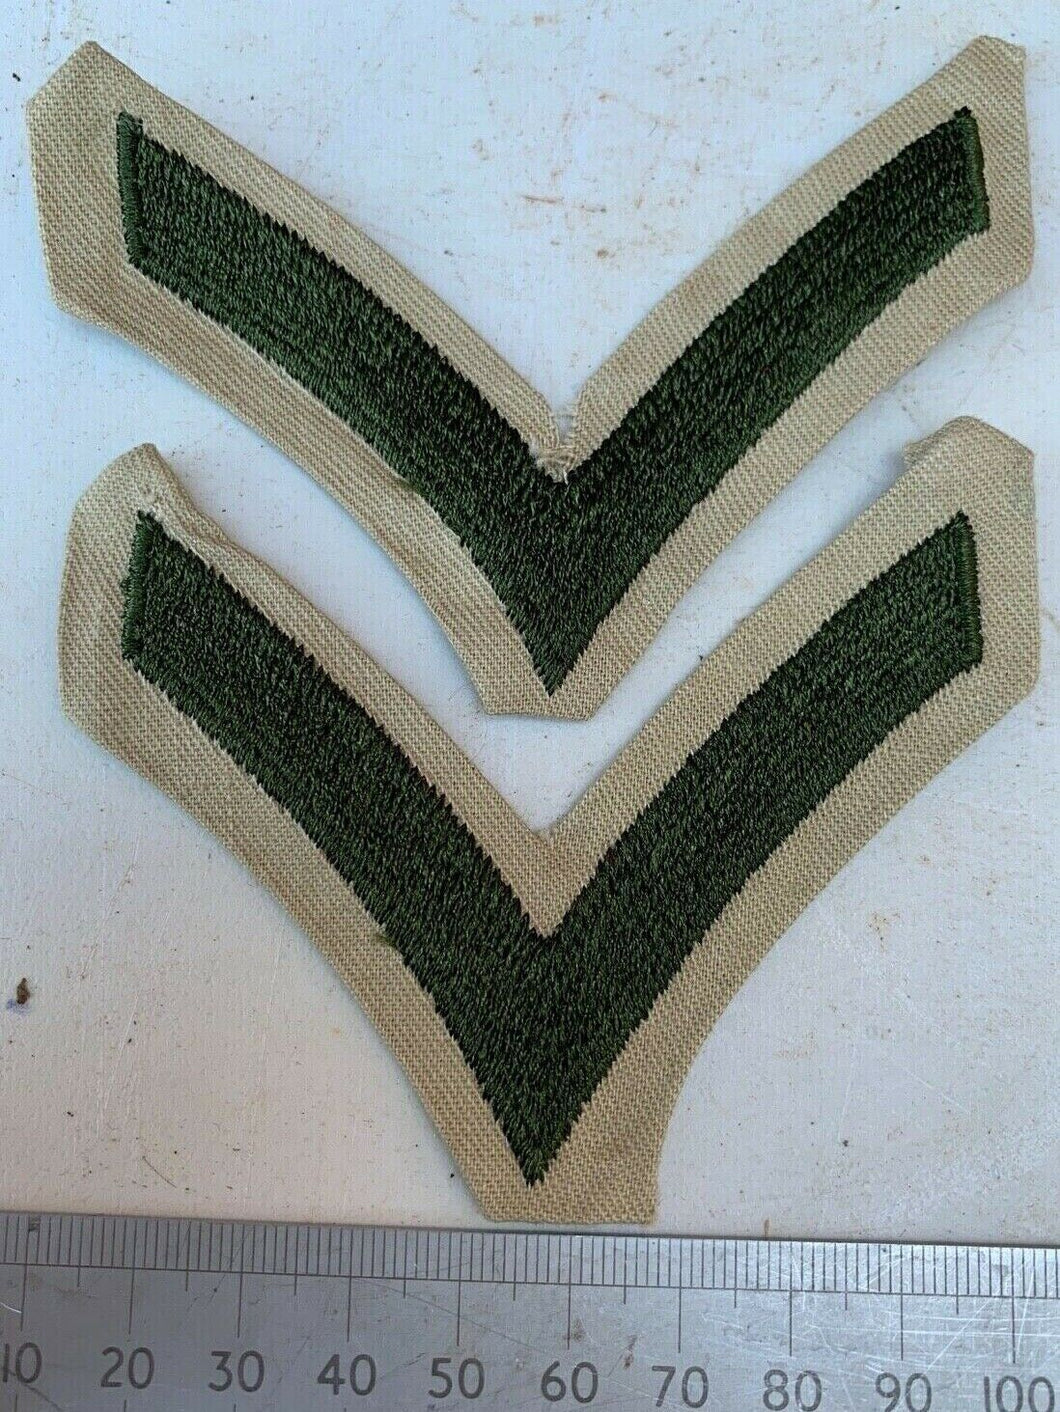 Pair of USMC United States Marine Corps Army Rank Chevrons - Private First Class